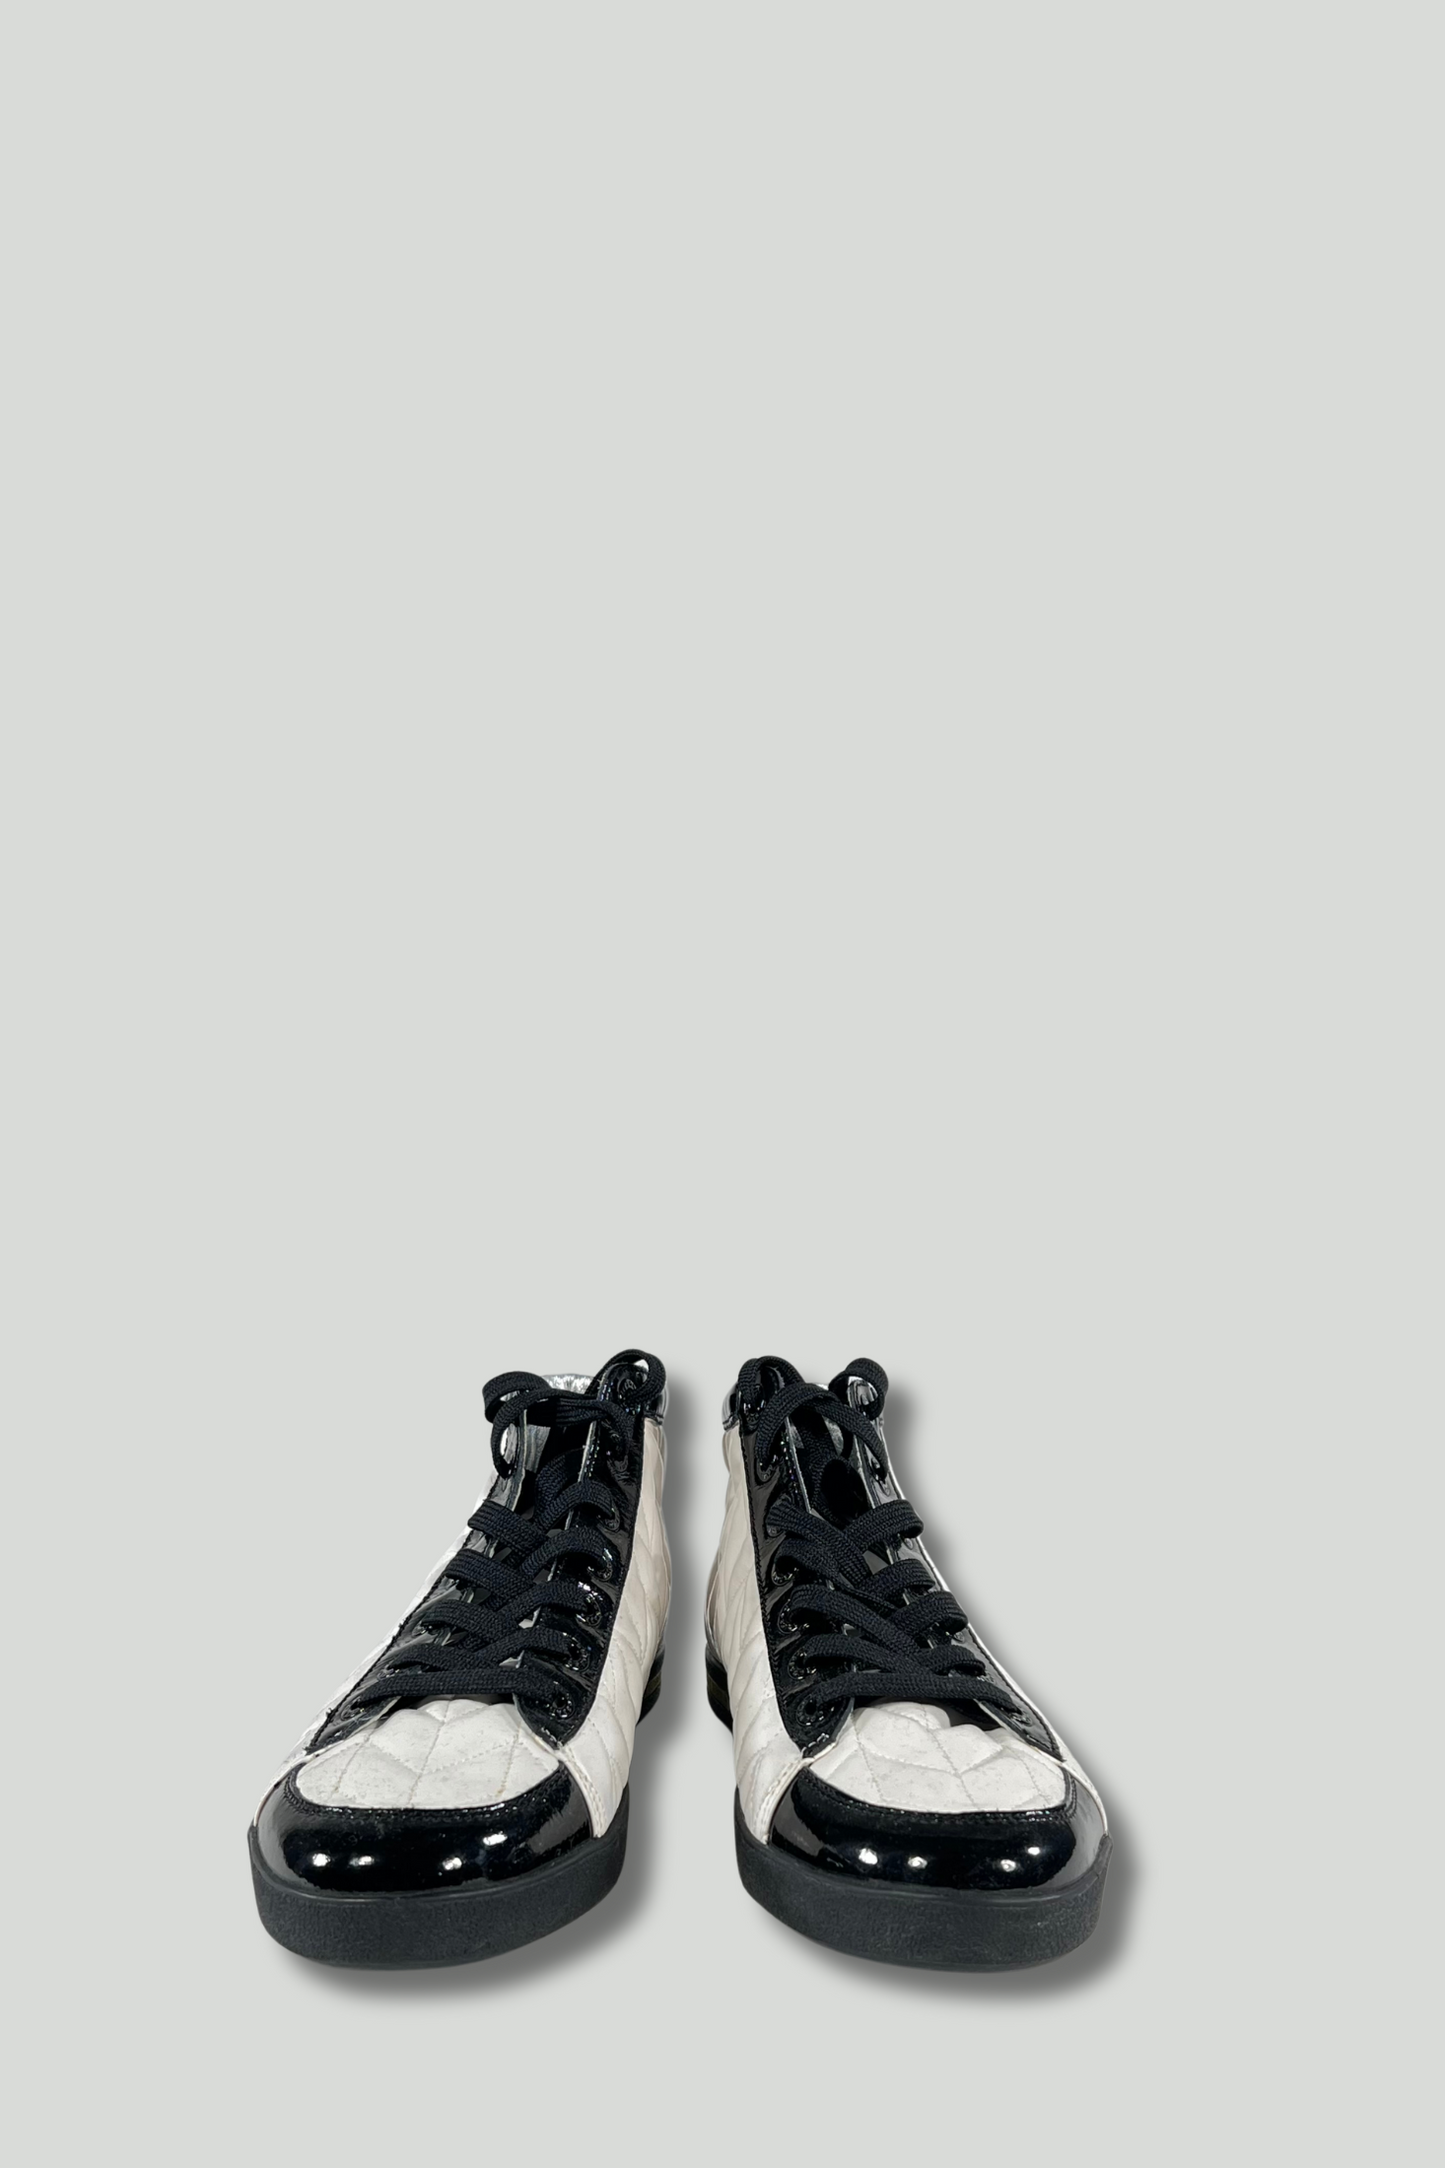 Hogan Black and White Sneakers